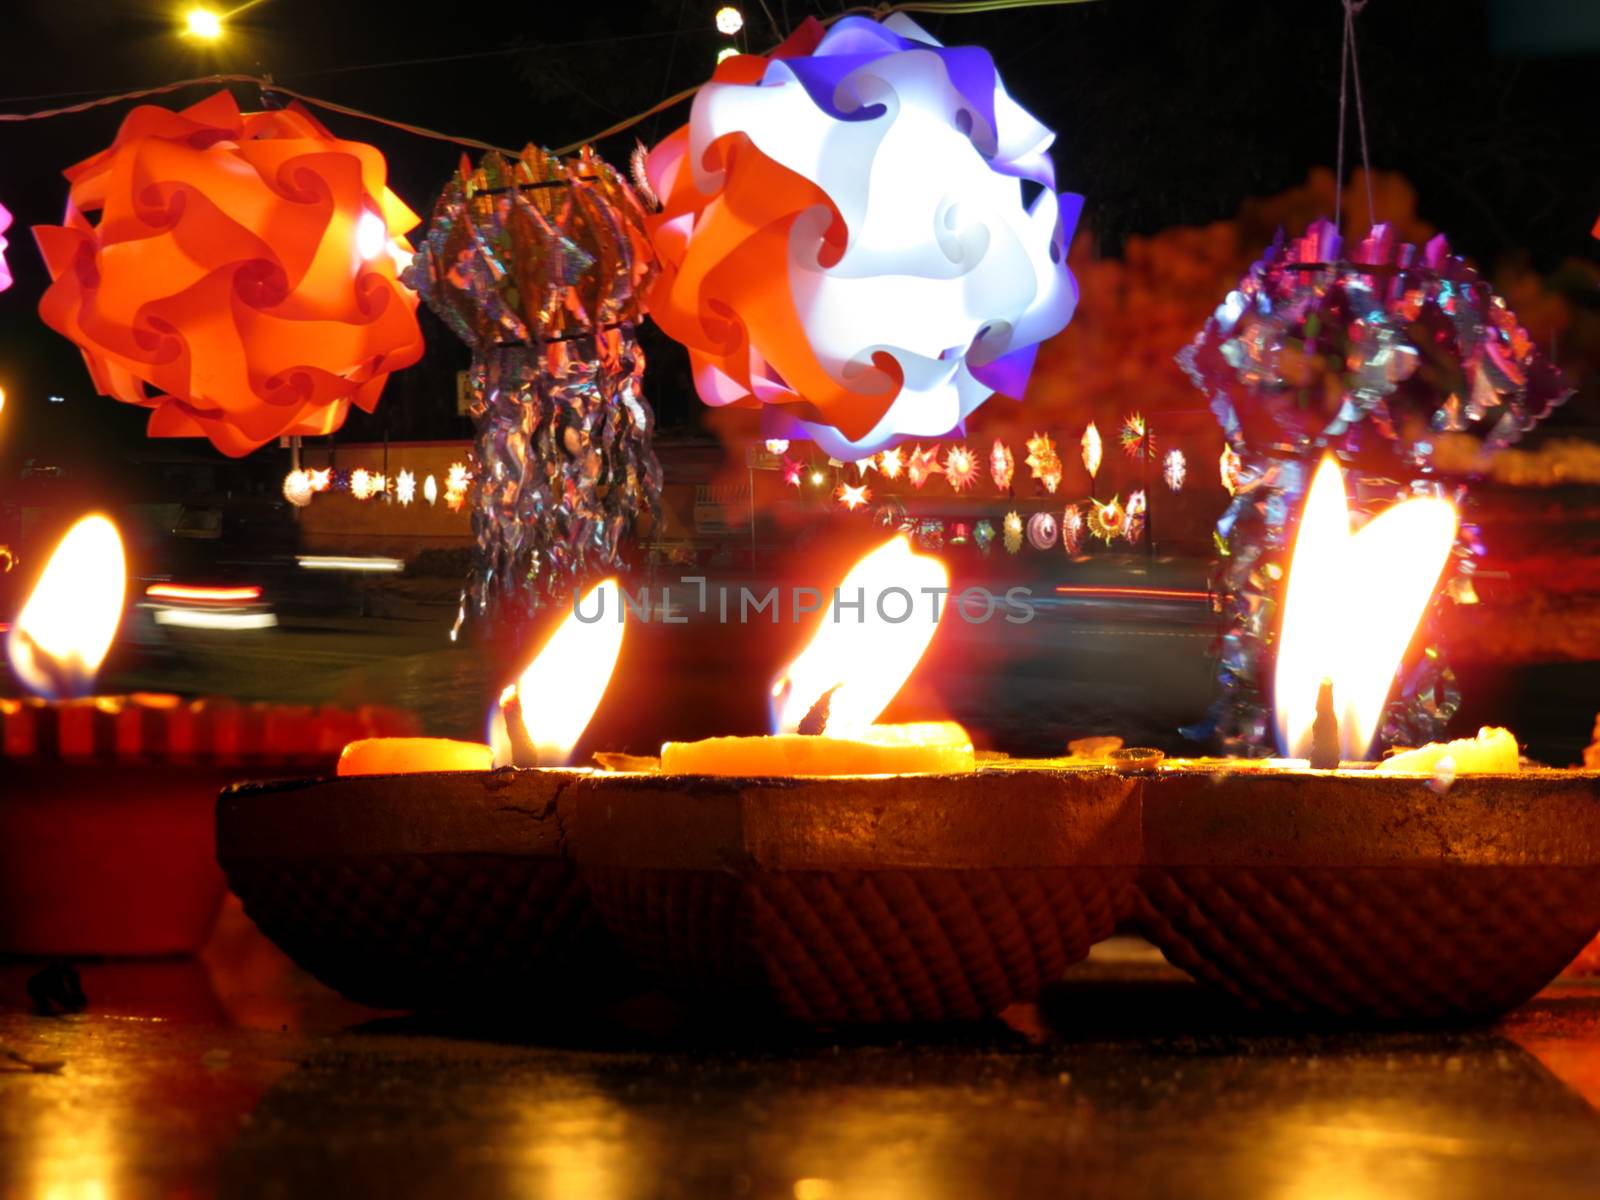 Diwali Lamps and Lanterns by thefinalmiracle